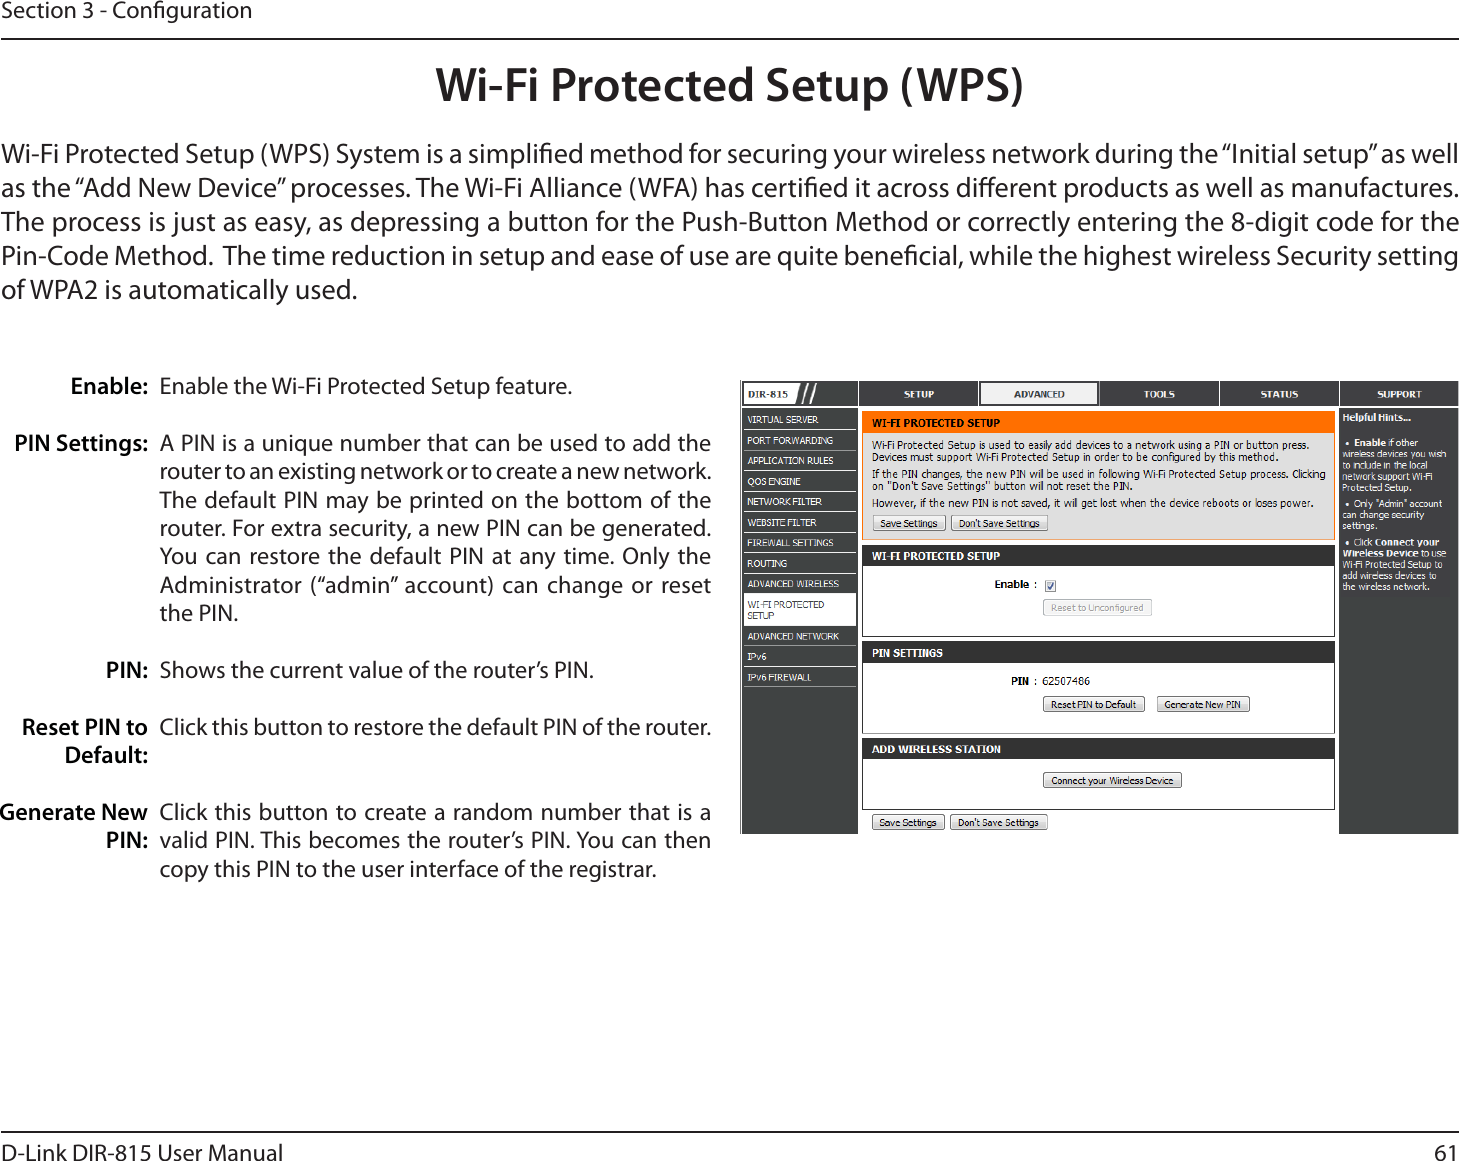 61D-Link DIR-815 User ManualSection 3 - CongurationWi-Fi Protected Setup (WPS)Enable the Wi-Fi Protected Setup feature. A PIN is a unique number that can be used to add the router to an existing network or to create a new network. The default PIN may be printed on the bottom of the router. For extra security, a new PIN can be generated. :PVDBO SFTUPSFUIFEFGBVMU1*/BU BOZUJNF0OMZ UIFAdministrator (“admin” account) can change or reset the PIN. Shows the current value of the router’s PIN. Click this button to restore the default PIN of the router. Click this button to create a random number that is a WBMJE1*/5IJTCFDPNFTUIFSPVUFST1*/:PVDBOUIFOcopy this PIN to the user interface of the registrar.Enable:PIN Settings: PIN:Reset PIN to Default:Generate New PIN:Wi-Fi Protected Setup (WPS) System is a simplied method for securing your wireless network during the “Initial setup” as well as the “Add New Device” processes. The Wi-Fi Alliance (WFA) has certied it across dierent products as well as manufactures. The process is just as easy, as depressing a button for the Push-Button Method or correctly entering the 8-digit code for the Pin-Code Method.  The time reduction in setup and ease of use are quite benecial, while the highest wireless Security setting of WPA2 is automatically used.